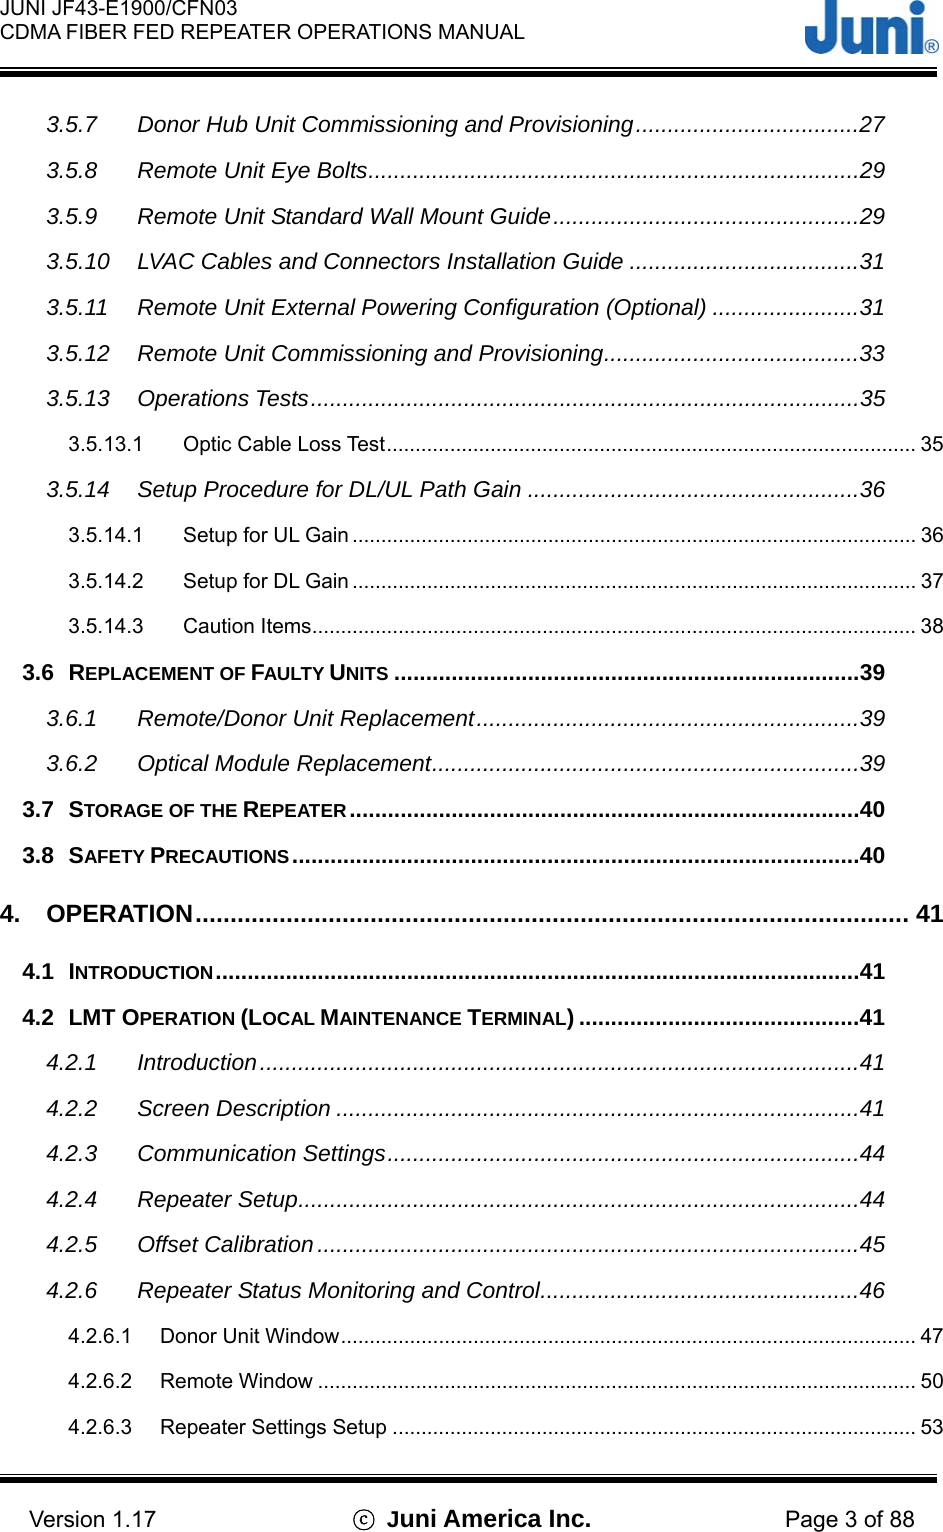  JUNI JF43-E1900/CFN03 CDMA FIBER FED REPEATER OPERATIONS MANUAL                                    Version 1.17  ⓒ Juni America Inc. Page 3 of 88 3.5.7 Donor Hub Unit Commissioning and Provisioning...................................27 3.5.8 Remote Unit Eye Bolts.............................................................................29 3.5.9 Remote Unit Standard Wall Mount Guide................................................29 3.5.10 LVAC Cables and Connectors Installation Guide ....................................31 3.5.11 Remote Unit External Powering Configuration (Optional) .......................31 3.5.12 Remote Unit Commissioning and Provisioning........................................33 3.5.13 Operations Tests......................................................................................35 3.5.13.1 Optic Cable Loss Test............................................................................................ 35 3.5.14 Setup Procedure for DL/UL Path Gain ....................................................36 3.5.14.1 Setup for UL Gain .................................................................................................. 36 3.5.14.2 Setup for DL Gain .................................................................................................. 37 3.5.14.3 Caution Items......................................................................................................... 38 3.6 REPLACEMENT OF FAULTY UNITS .........................................................................39 3.6.1 Remote/Donor Unit Replacement............................................................39 3.6.2 Optical Module Replacement...................................................................39 3.7 STORAGE OF THE REPEATER ................................................................................40 3.8 SAFETY PRECAUTIONS.........................................................................................40 4. OPERATION...................................................................................................... 41 4.1 INTRODUCTION.....................................................................................................41 4.2 LMT OPERATION (LOCAL MAINTENANCE TERMINAL) ............................................41 4.2.1 Introduction..............................................................................................41 4.2.2 Screen Description ..................................................................................41 4.2.3 Communication Settings..........................................................................44 4.2.4 Repeater Setup........................................................................................44 4.2.5 Offset Calibration.....................................................................................45 4.2.6 Repeater Status Monitoring and Control..................................................46 4.2.6.1 Donor Unit Window.................................................................................................... 47 4.2.6.2 Remote Window ........................................................................................................ 50 4.2.6.3 Repeater Settings Setup ........................................................................................... 53 